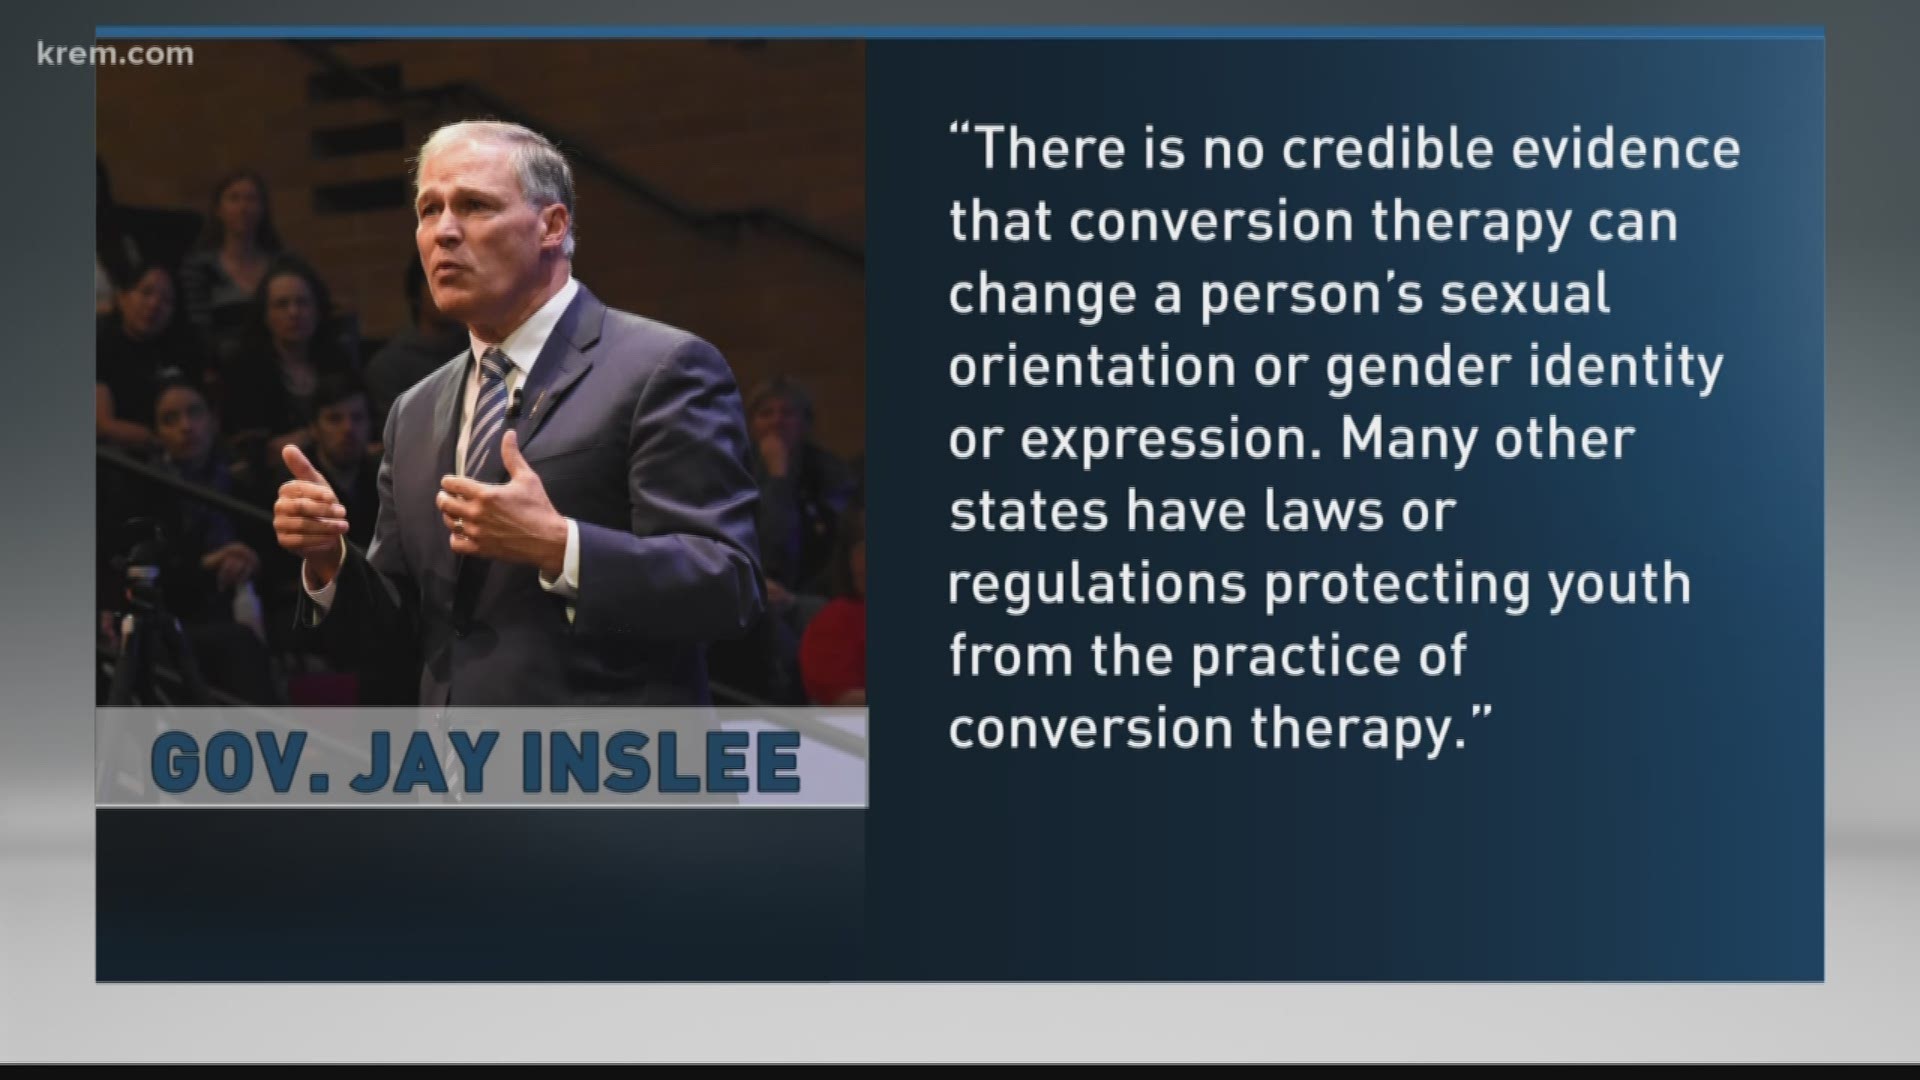 Gov. Inslee to sign ban on conversion therapy (3-28-18)